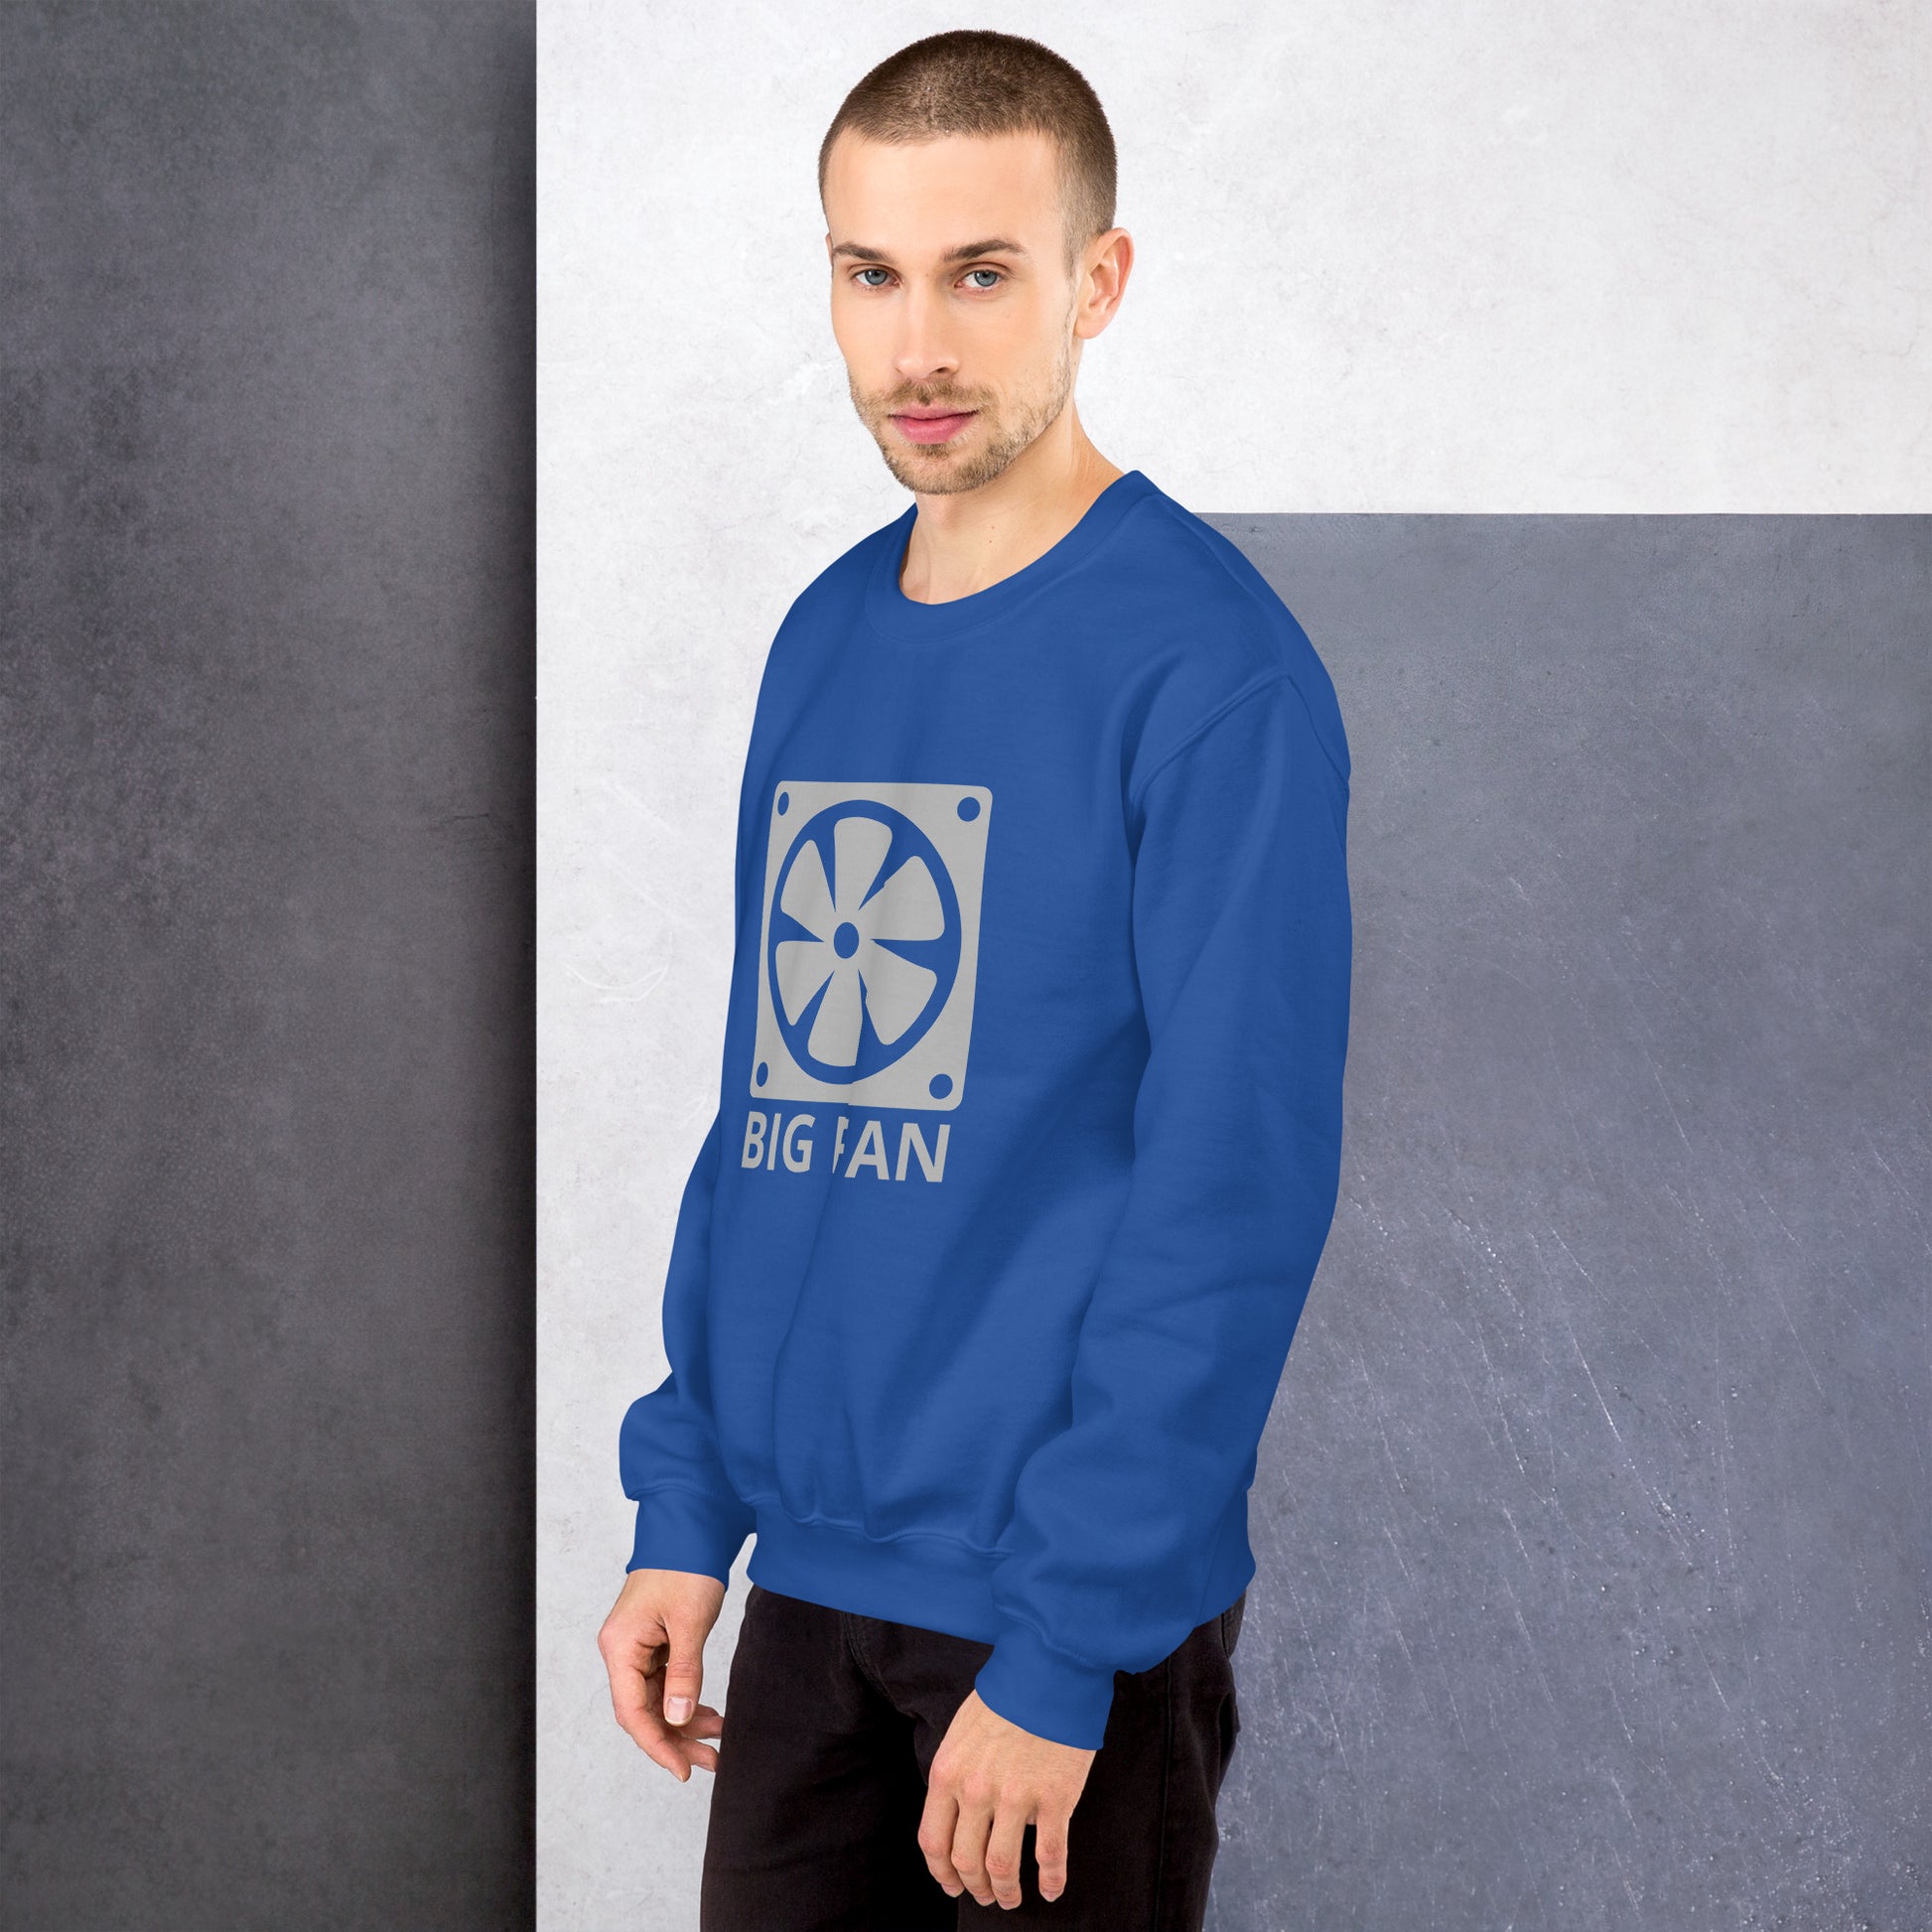 Men with royal blue sweatshirt with image of a big computer fan and the text "BIG FAN"